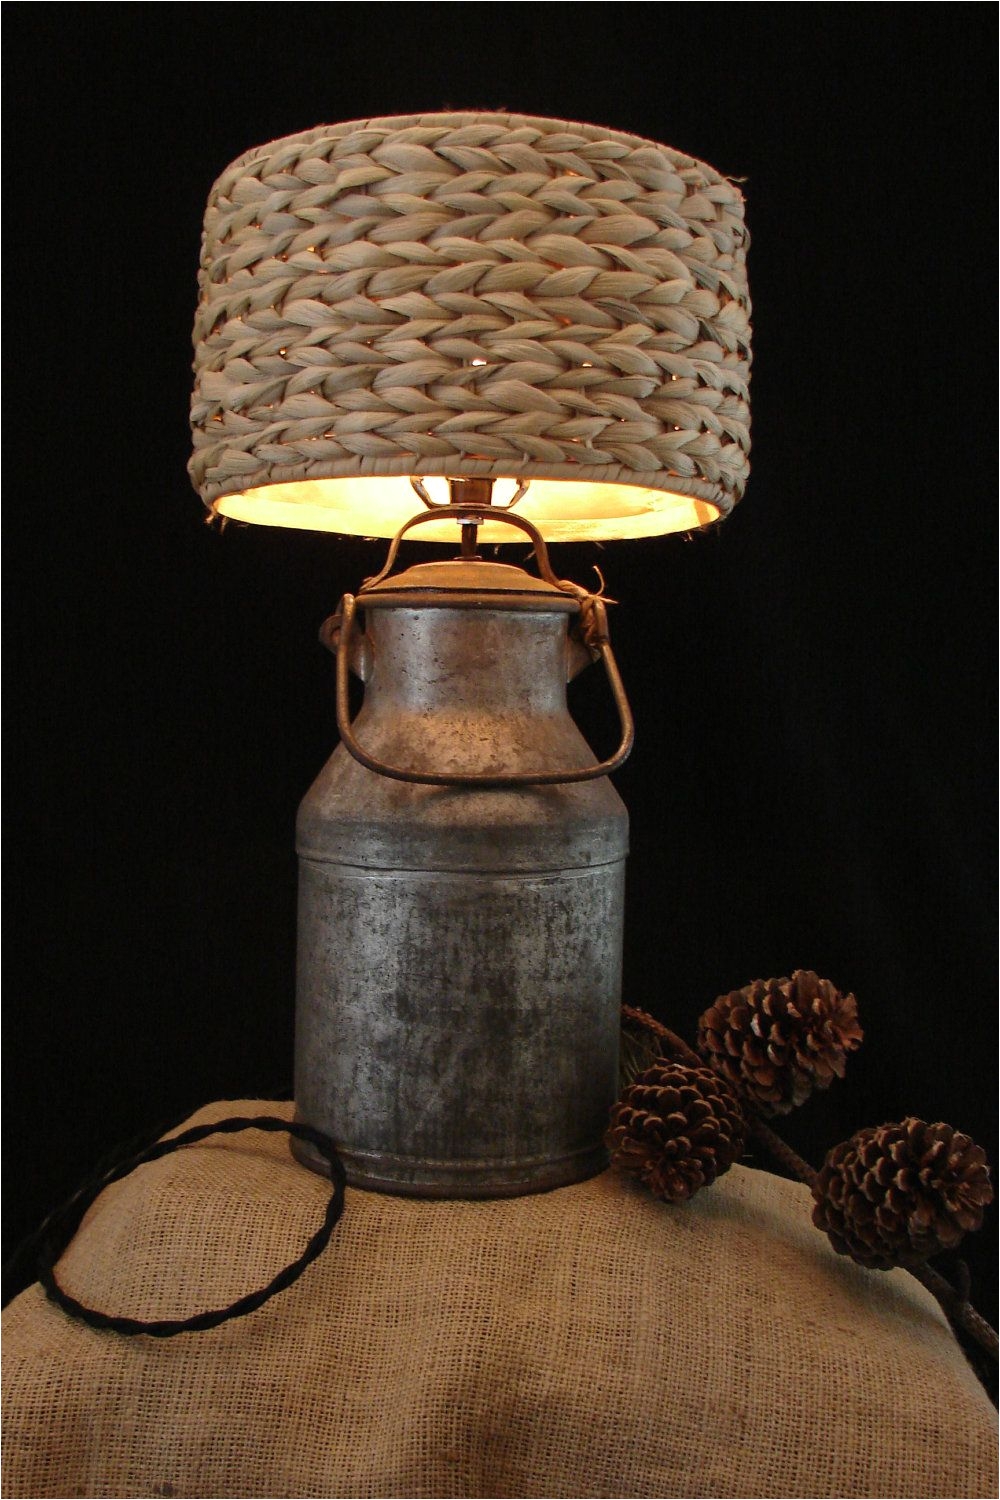 upcycled vintage galvanized dairy farm cream can this could probably be used for a hanging light